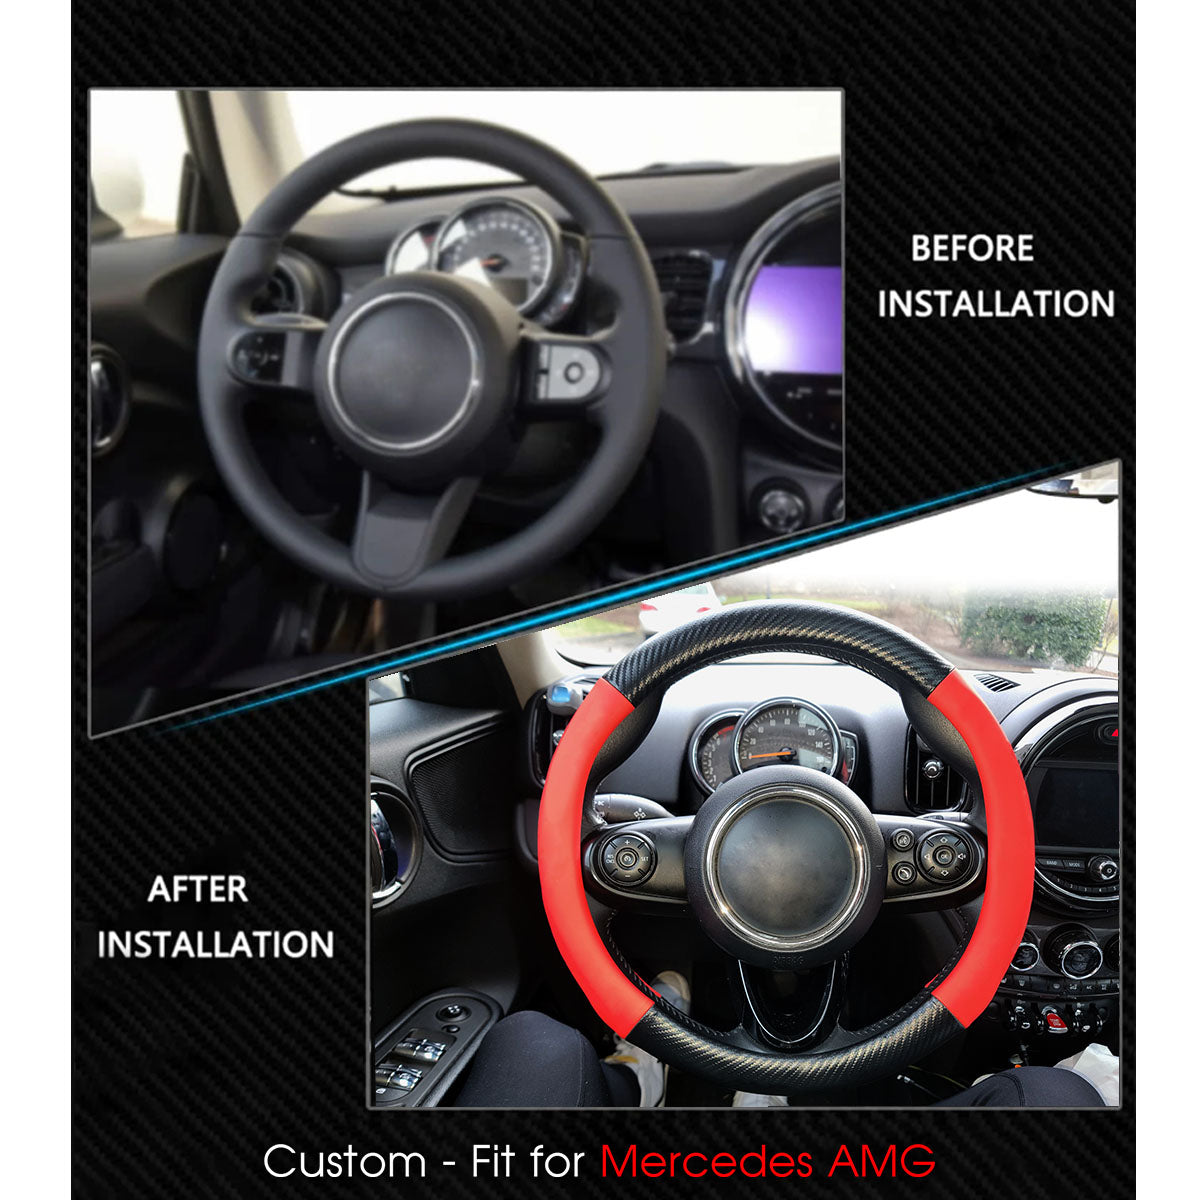 Car Steering Wheel Cover, Custom-Fit For Cars, Leather Nonslip 3D Carbon Fiber Texture Sport Style Wheel Cover for Women, Interior Modification for All Car Accessories DLLM225